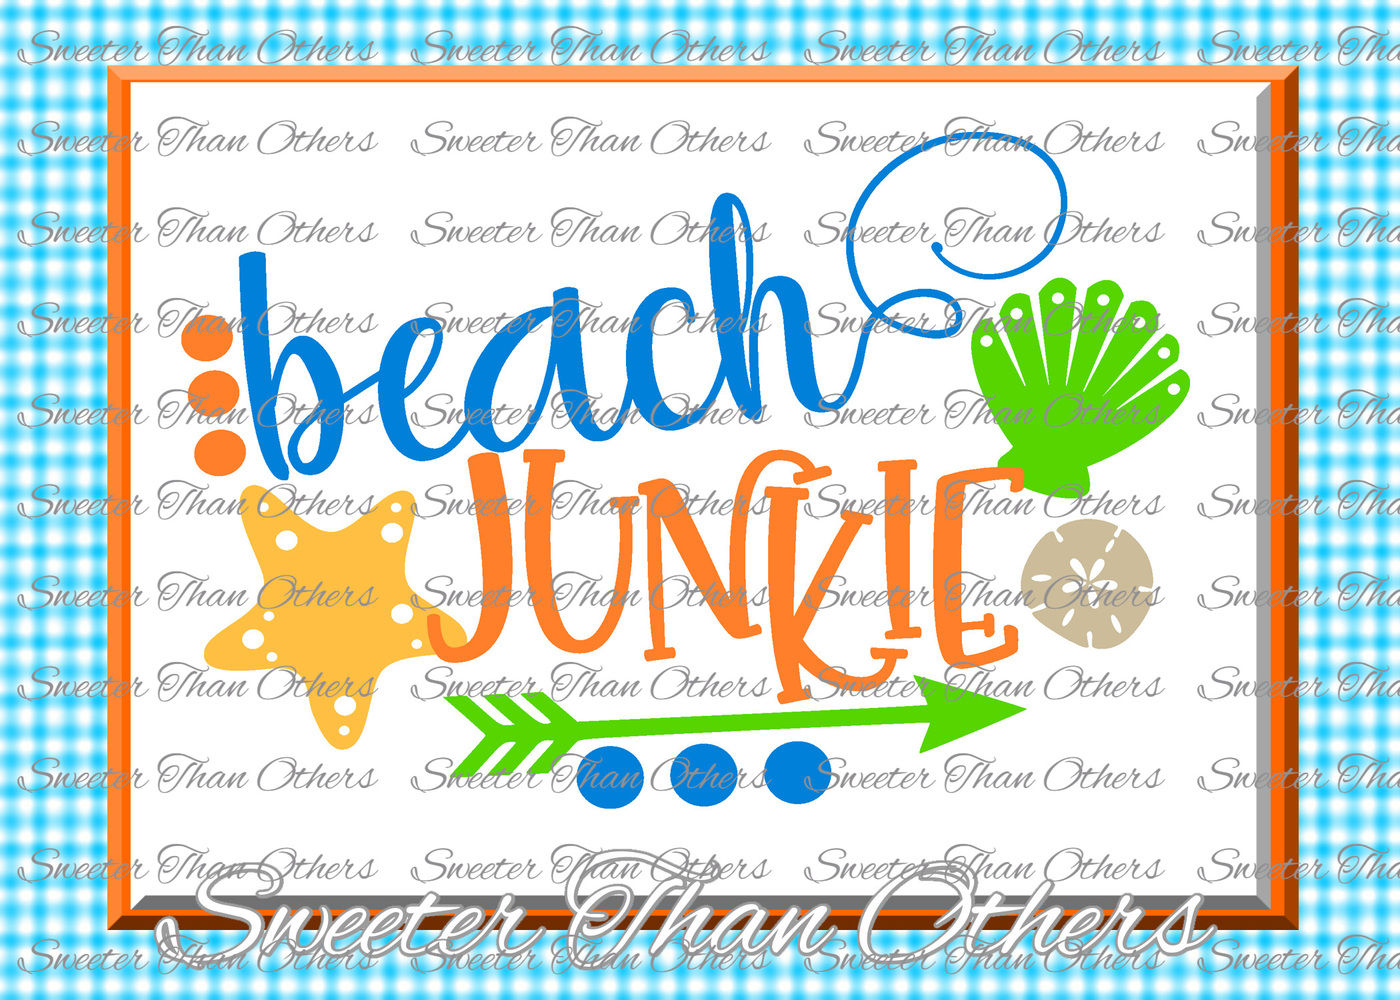 Download Beach Svg Beach Junkie Svg Summer Beach Pattern Dxf Silhouette Cameo Cut File Cricut Cut File Instant Download Vinyl Design Htv Scal By Sweeter Than Others Thehungryjpeg Com